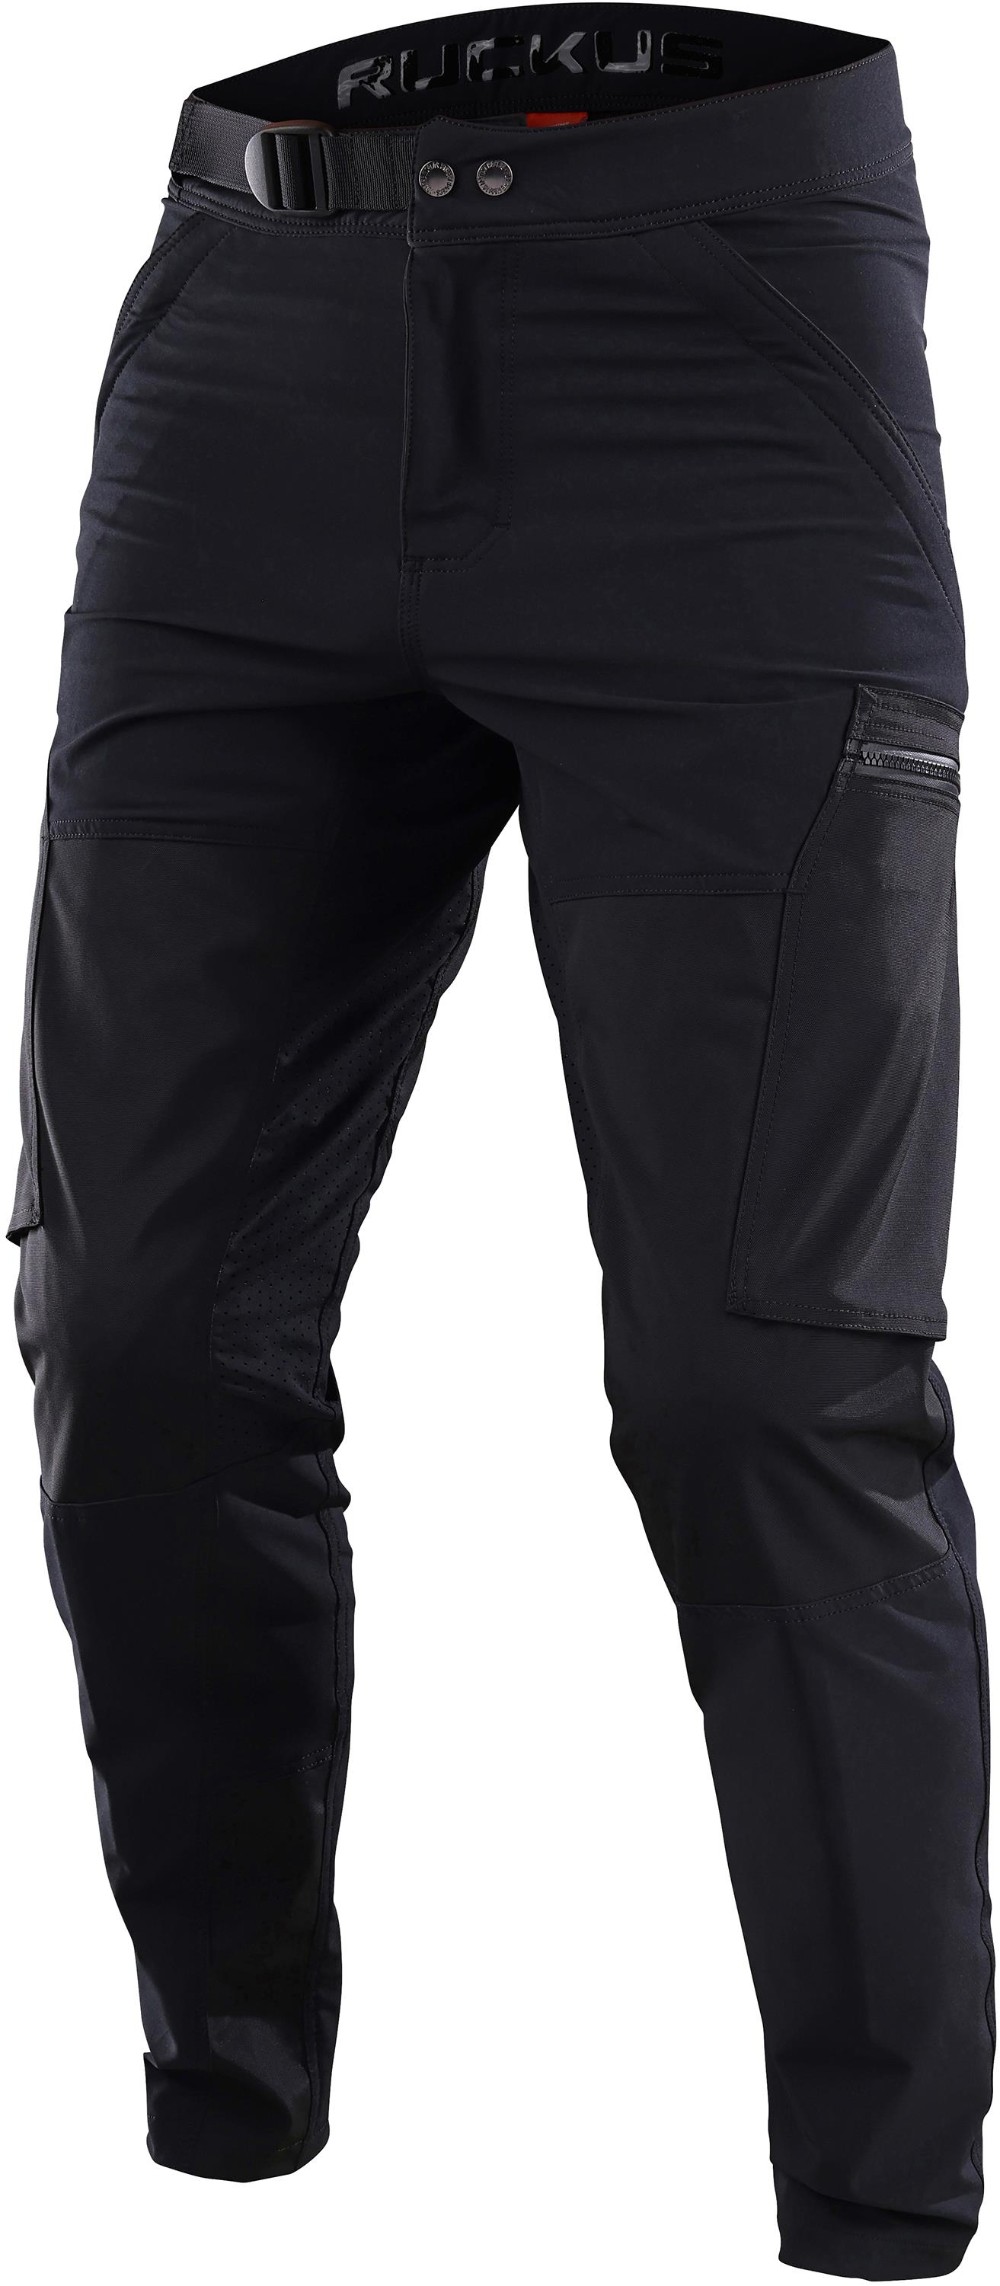 Ruckus Cargo MTB Cycling Trousers image 0